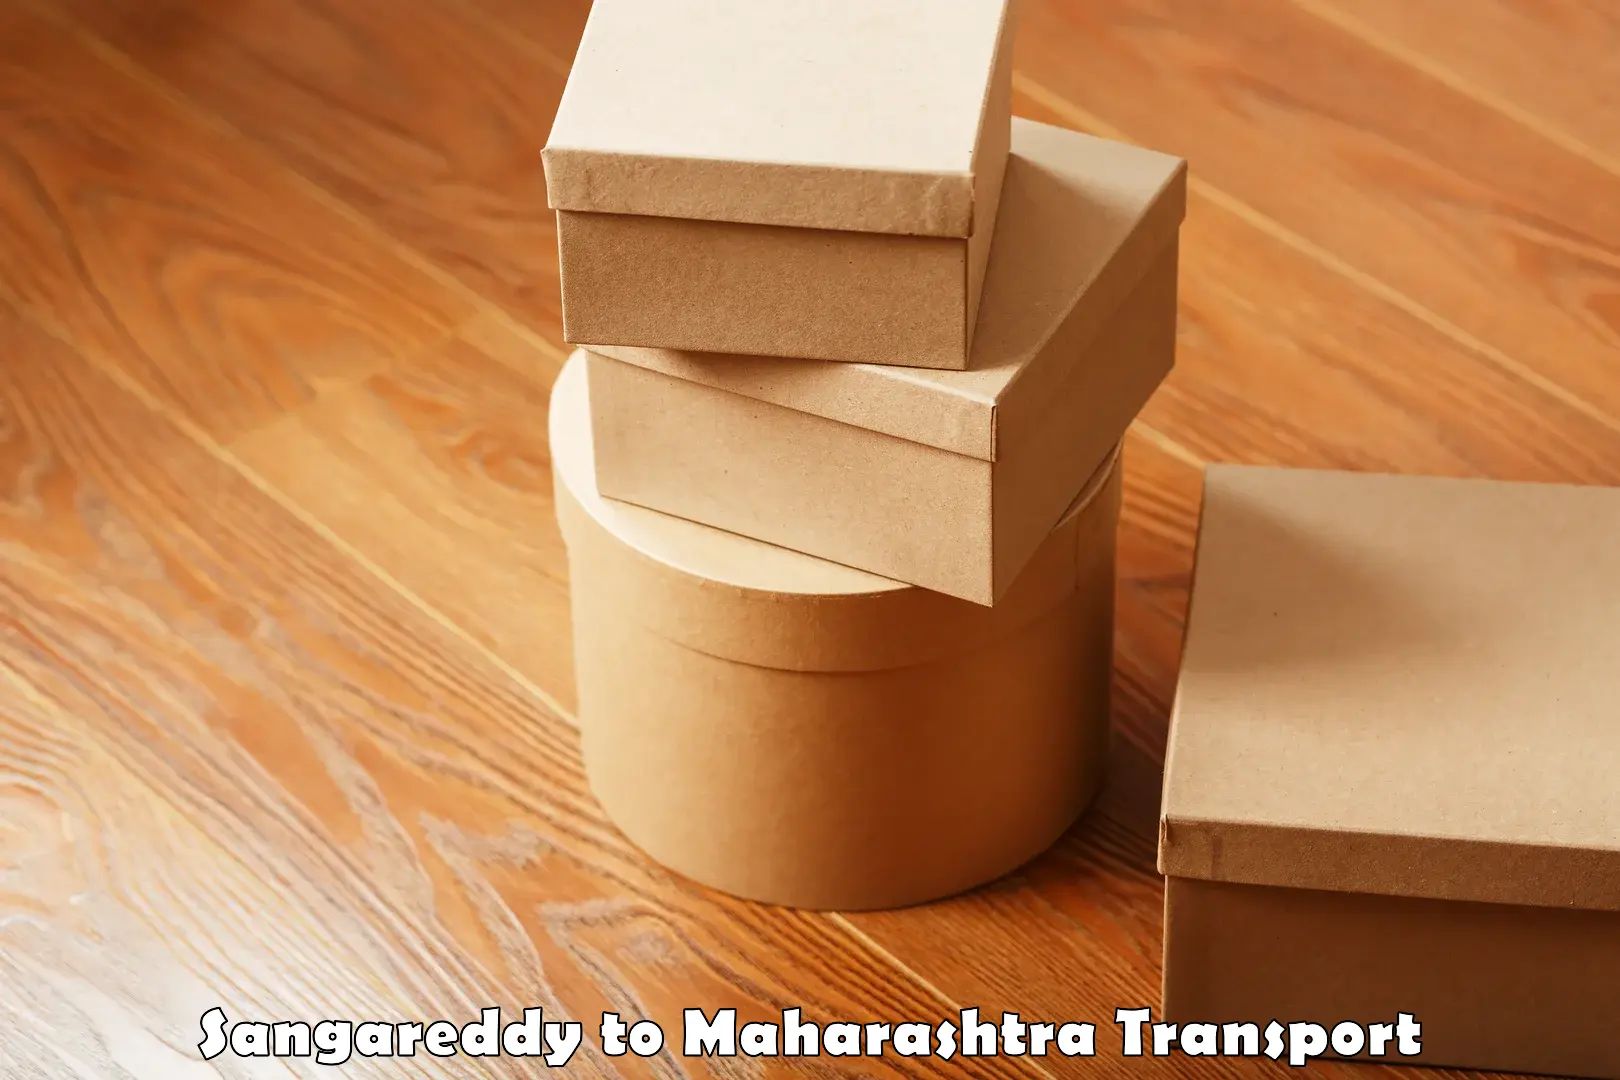 Truck transport companies in India in Sangareddy to Saphale